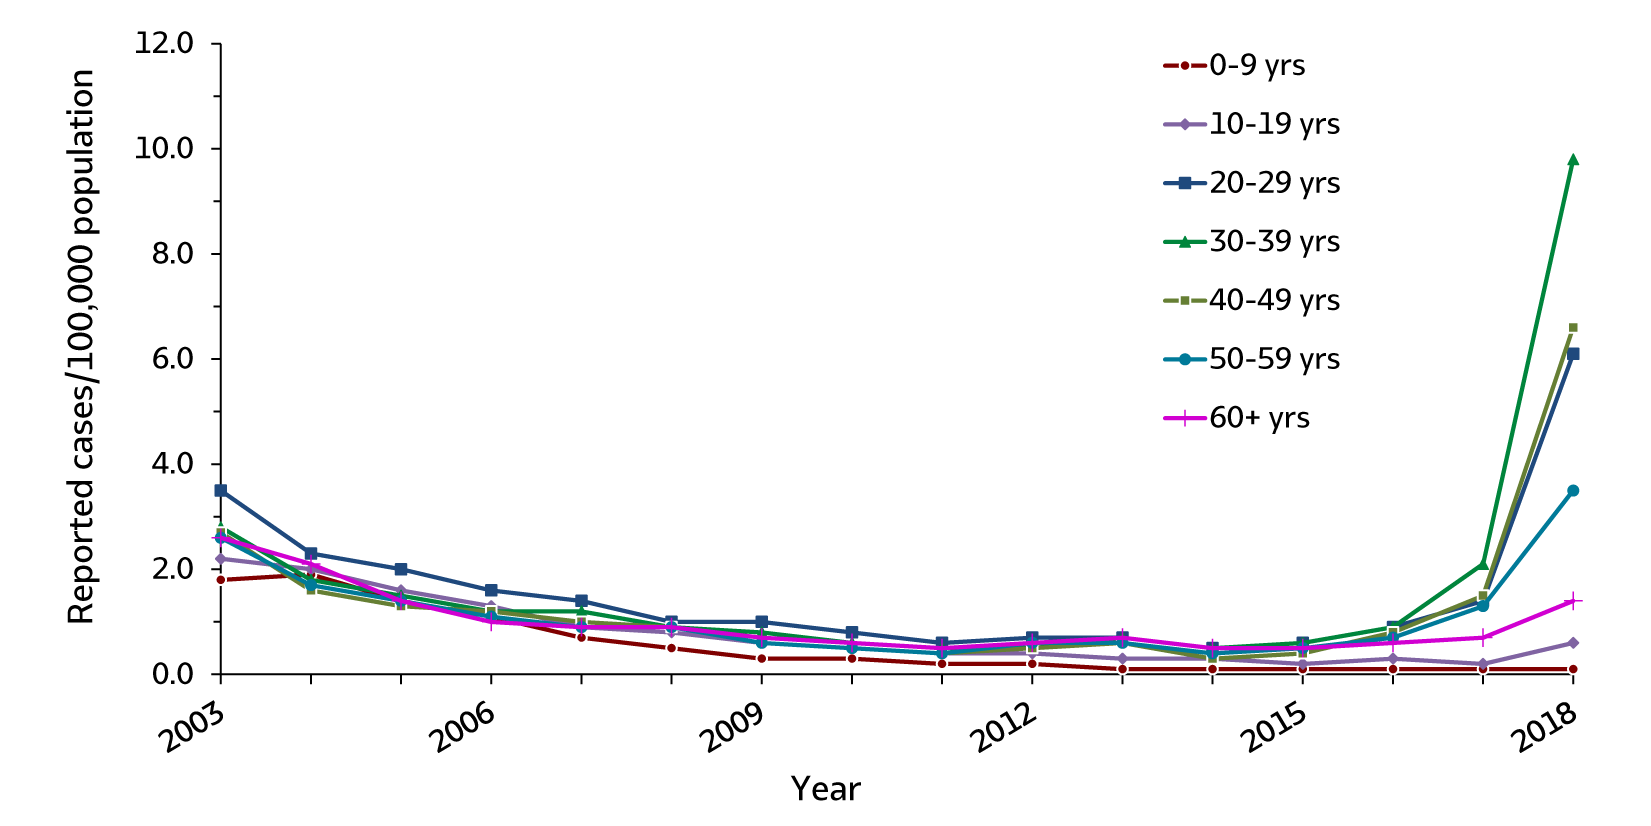 Figure 1.4. This line graph shows trends in the rates of hepatitis A by age groups (0 – 9 years, 10 – 19 years, 20 – 29 years, 30 – 39 years, 40 – 49 years, 50 – 59 years, and 60 years and older) for 2003 through 2018. For all age groups the reported rates of hepatitis A declined from 2003 through 2009, remained stable from 2009 through 2015, and increased from 2016 through 2018.  A large increase occurred between 2017 and 2018 for persons aged 20-29 years, 30-39 years, and 40-49 years. Over 55% of hepatitis A cases submitted to CDC in 2018 were among persons aged 30-49 years.